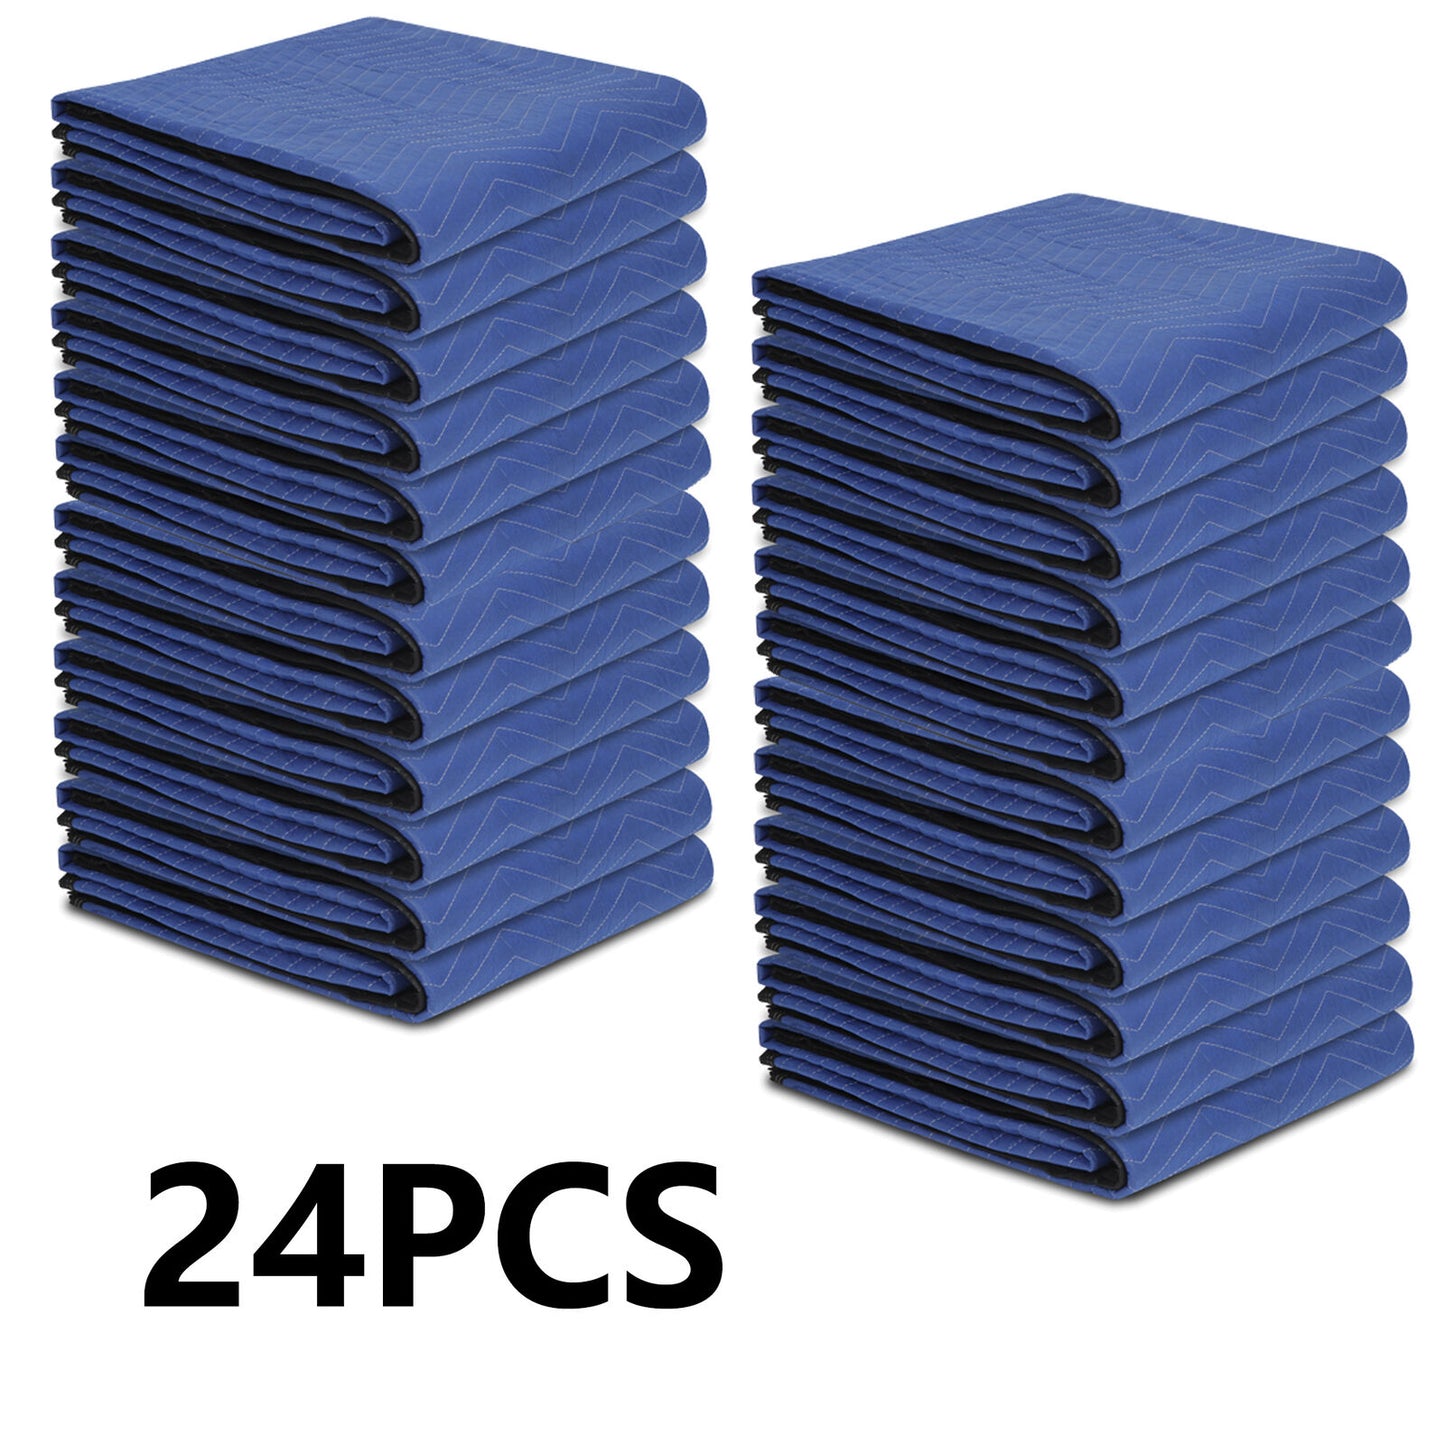 24 Pack Moving Blankets 80" x 72" Pro Economy Blue Shipping Furniture Pads